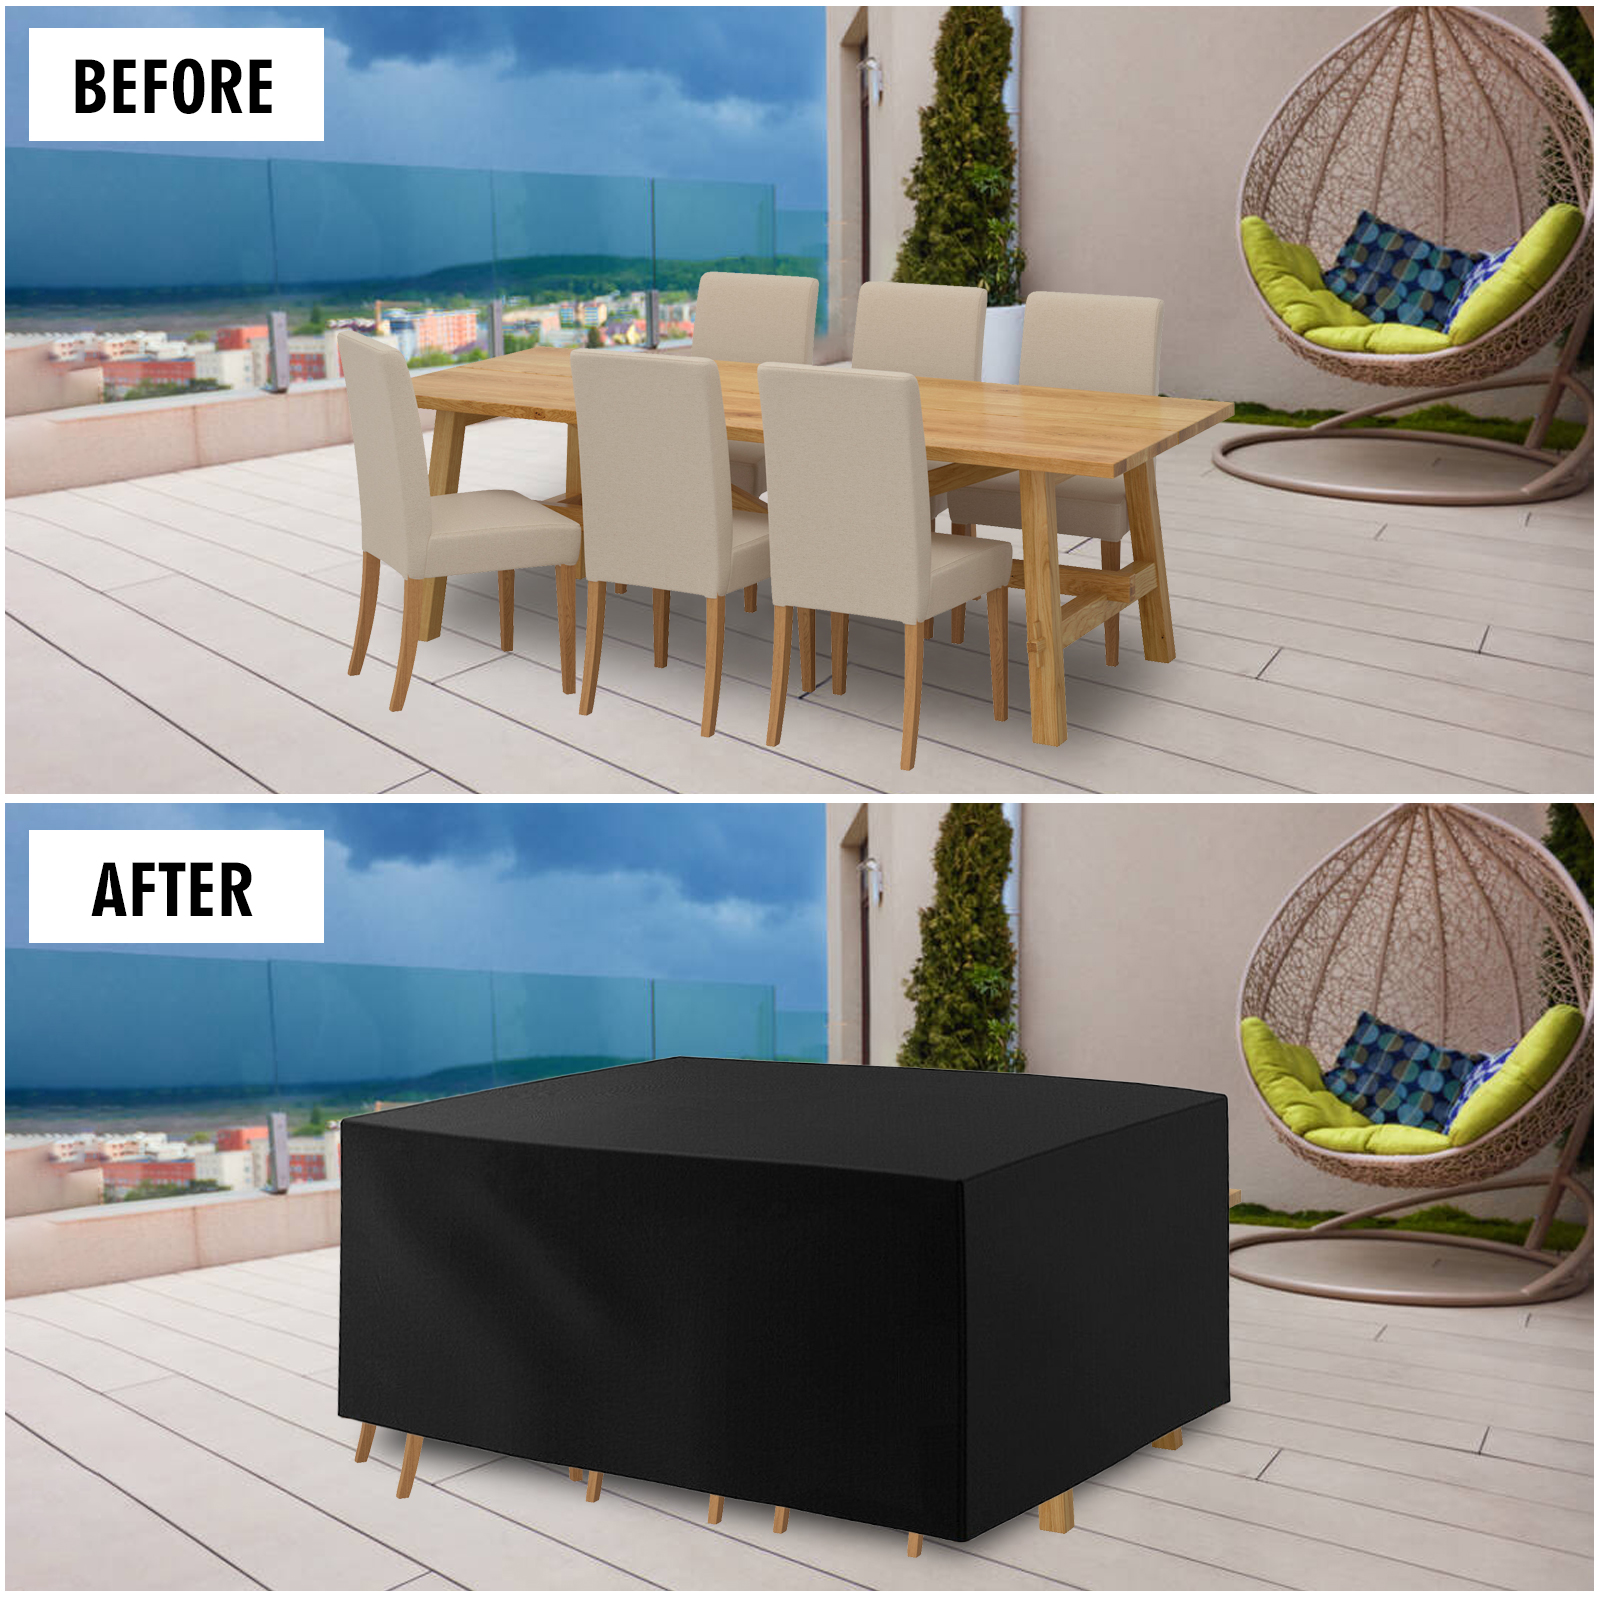 Details about   Outdoor Furniture Cover Garden Patio Rain UV Table Protector Sofa 7Size 210D 